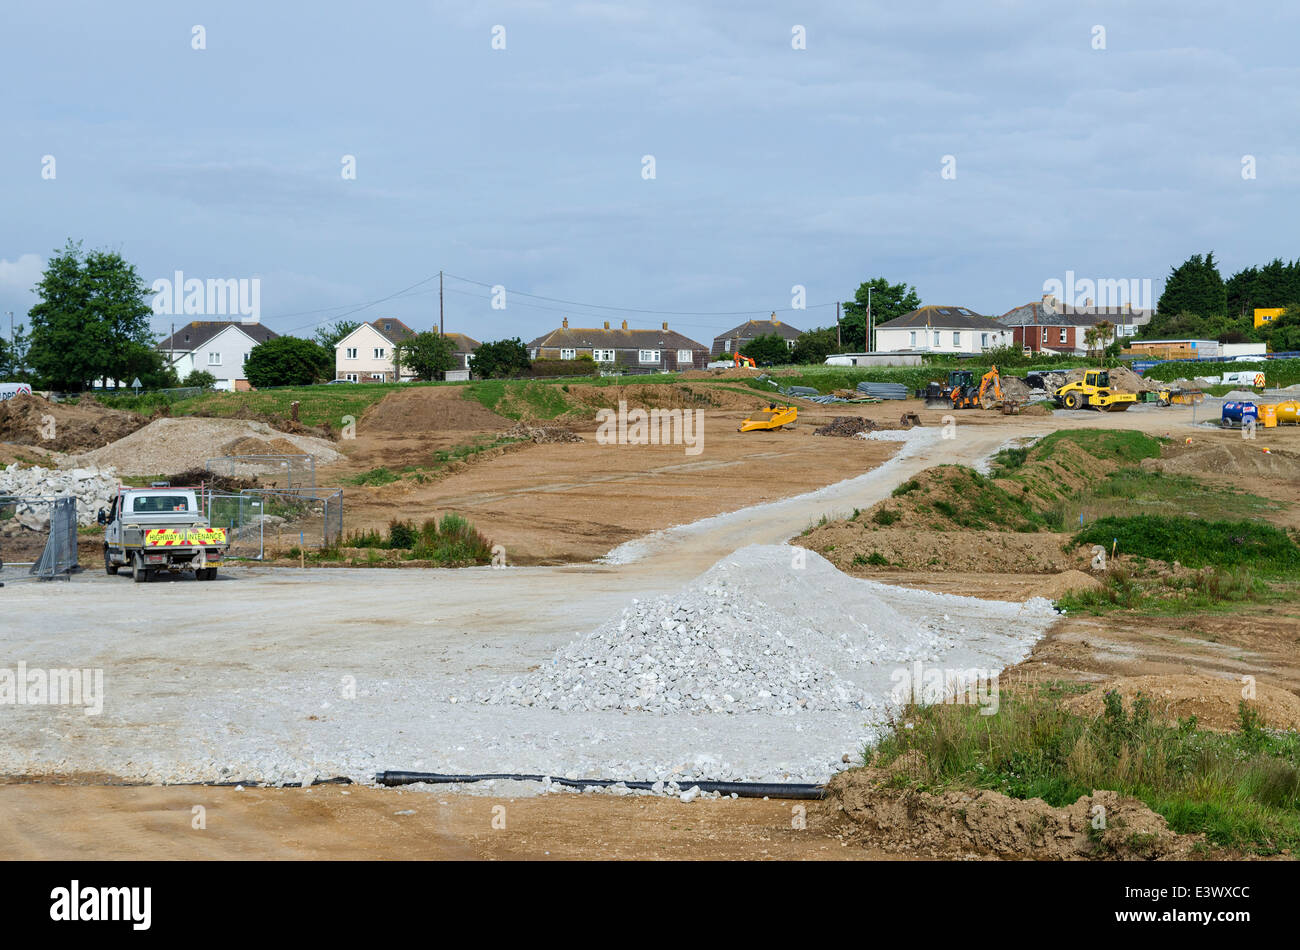 a new out of town development in truro, cornwall, uk Stock Photo